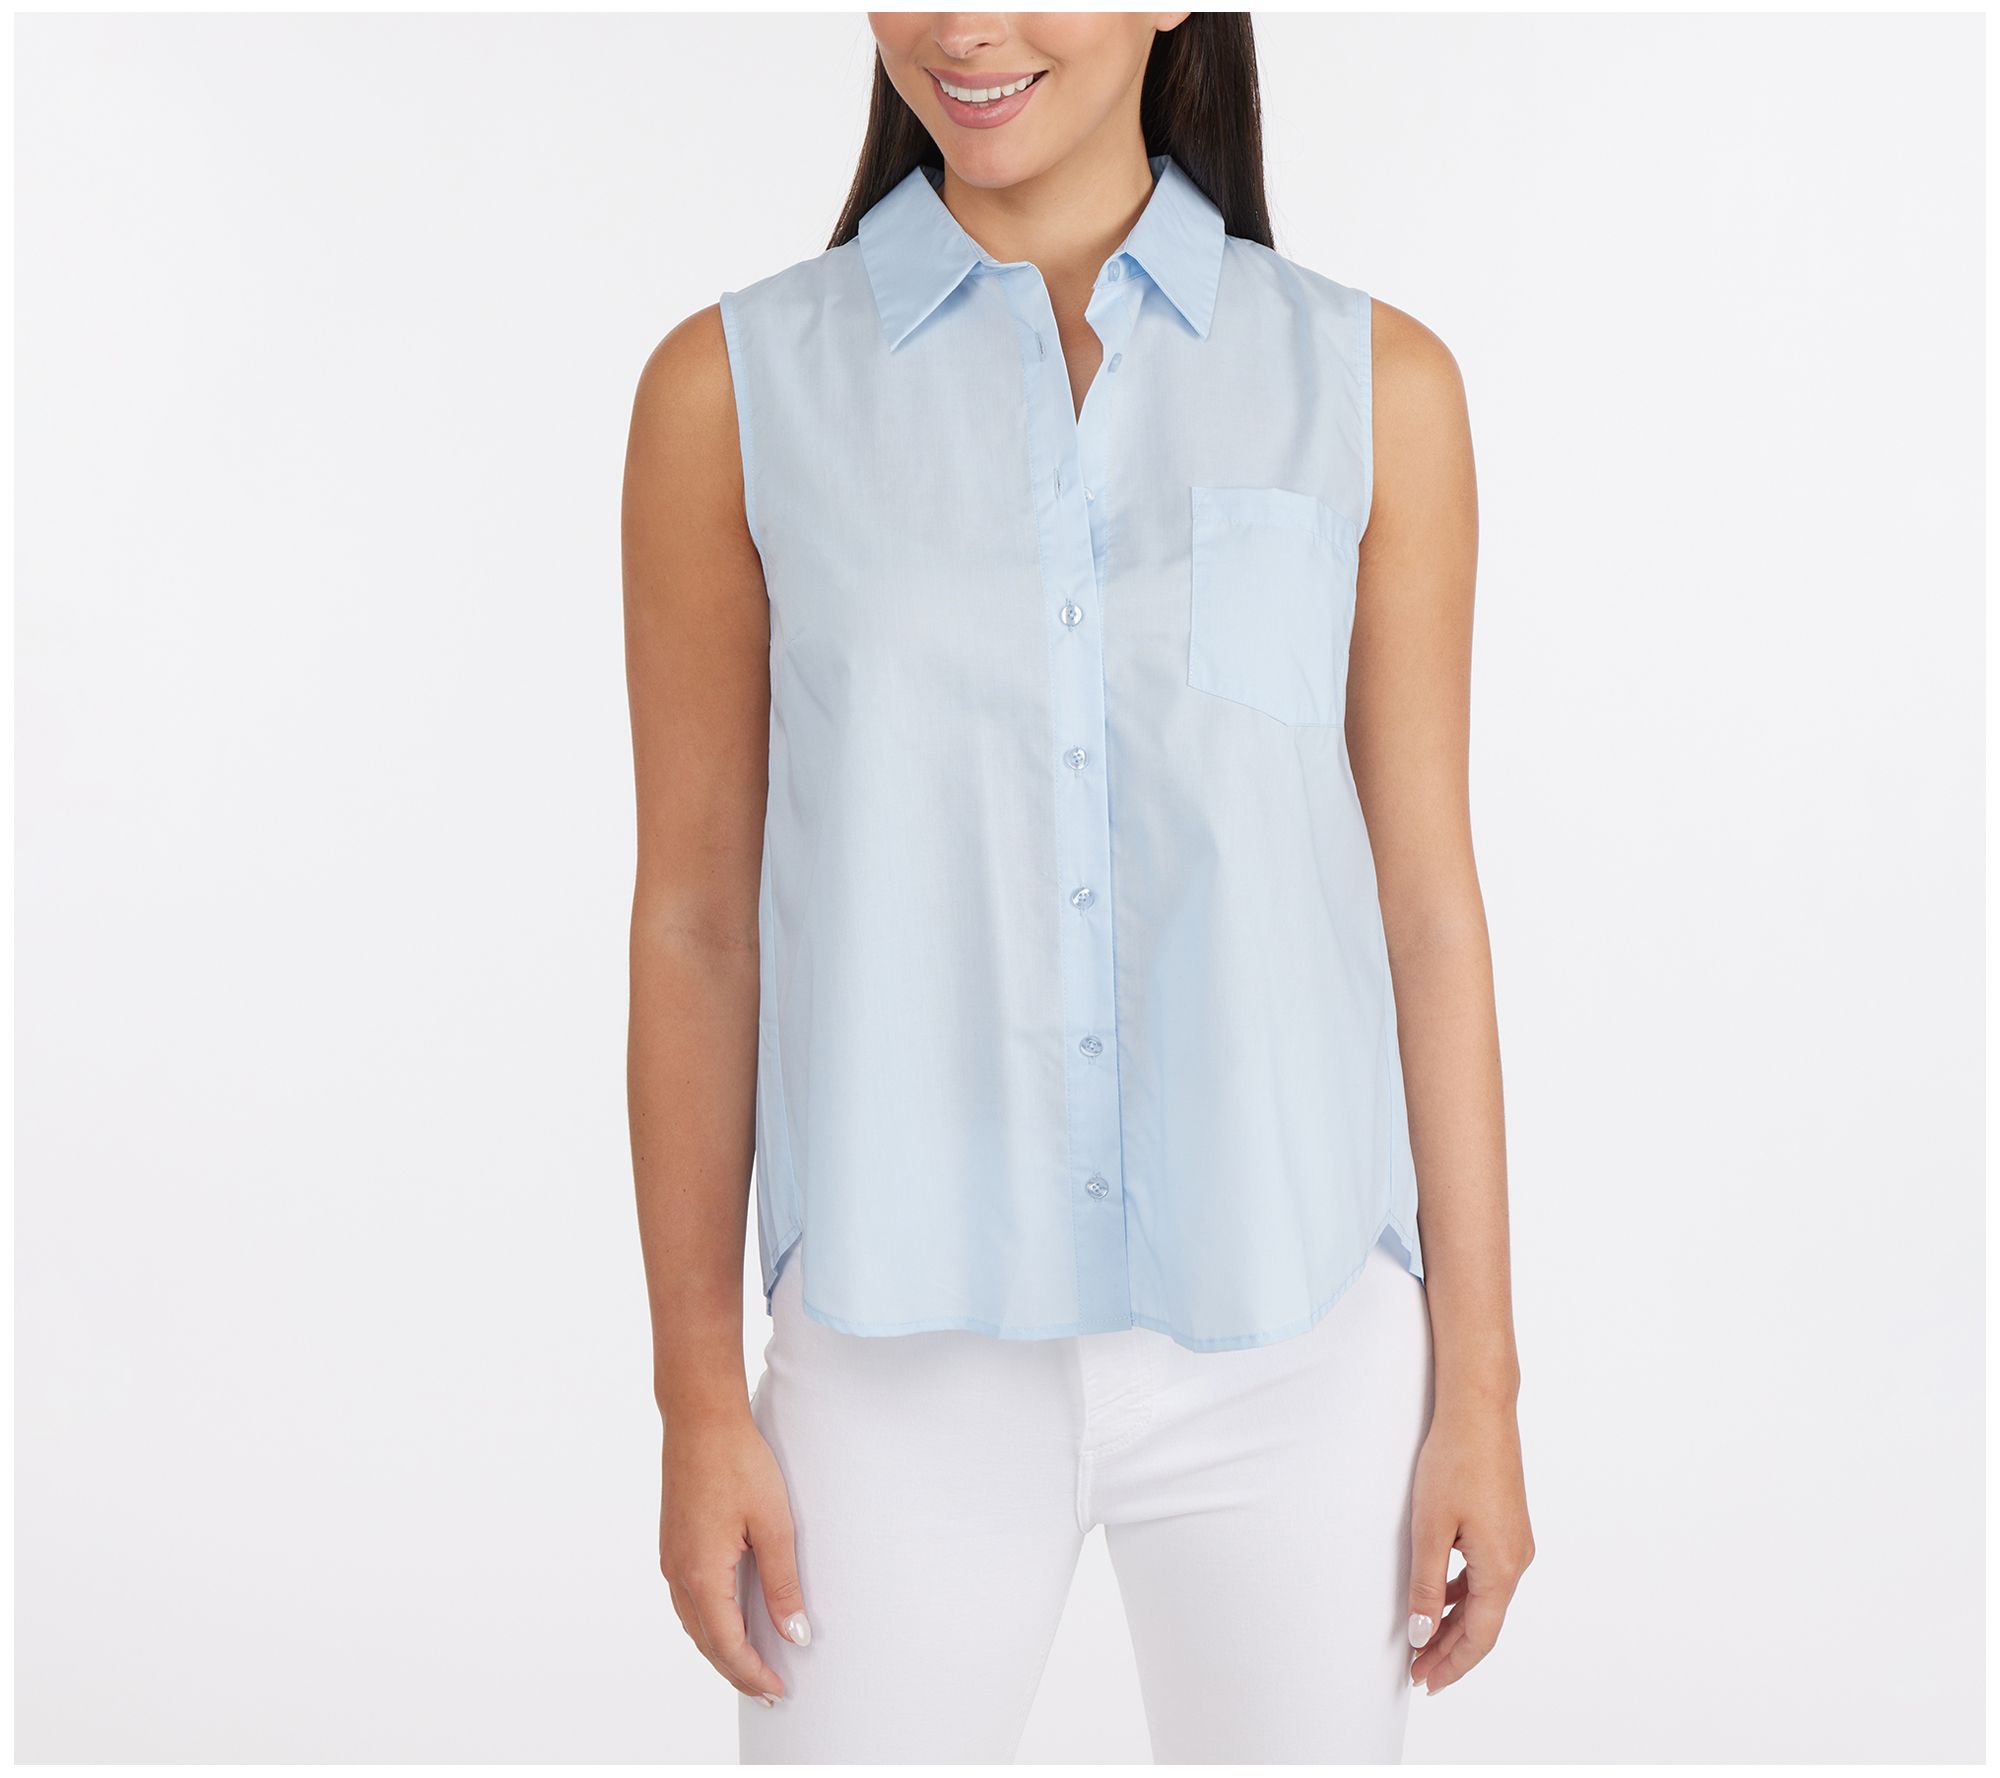 Ellen Tracy Women's Shirt with Pleated Back - QVC.com